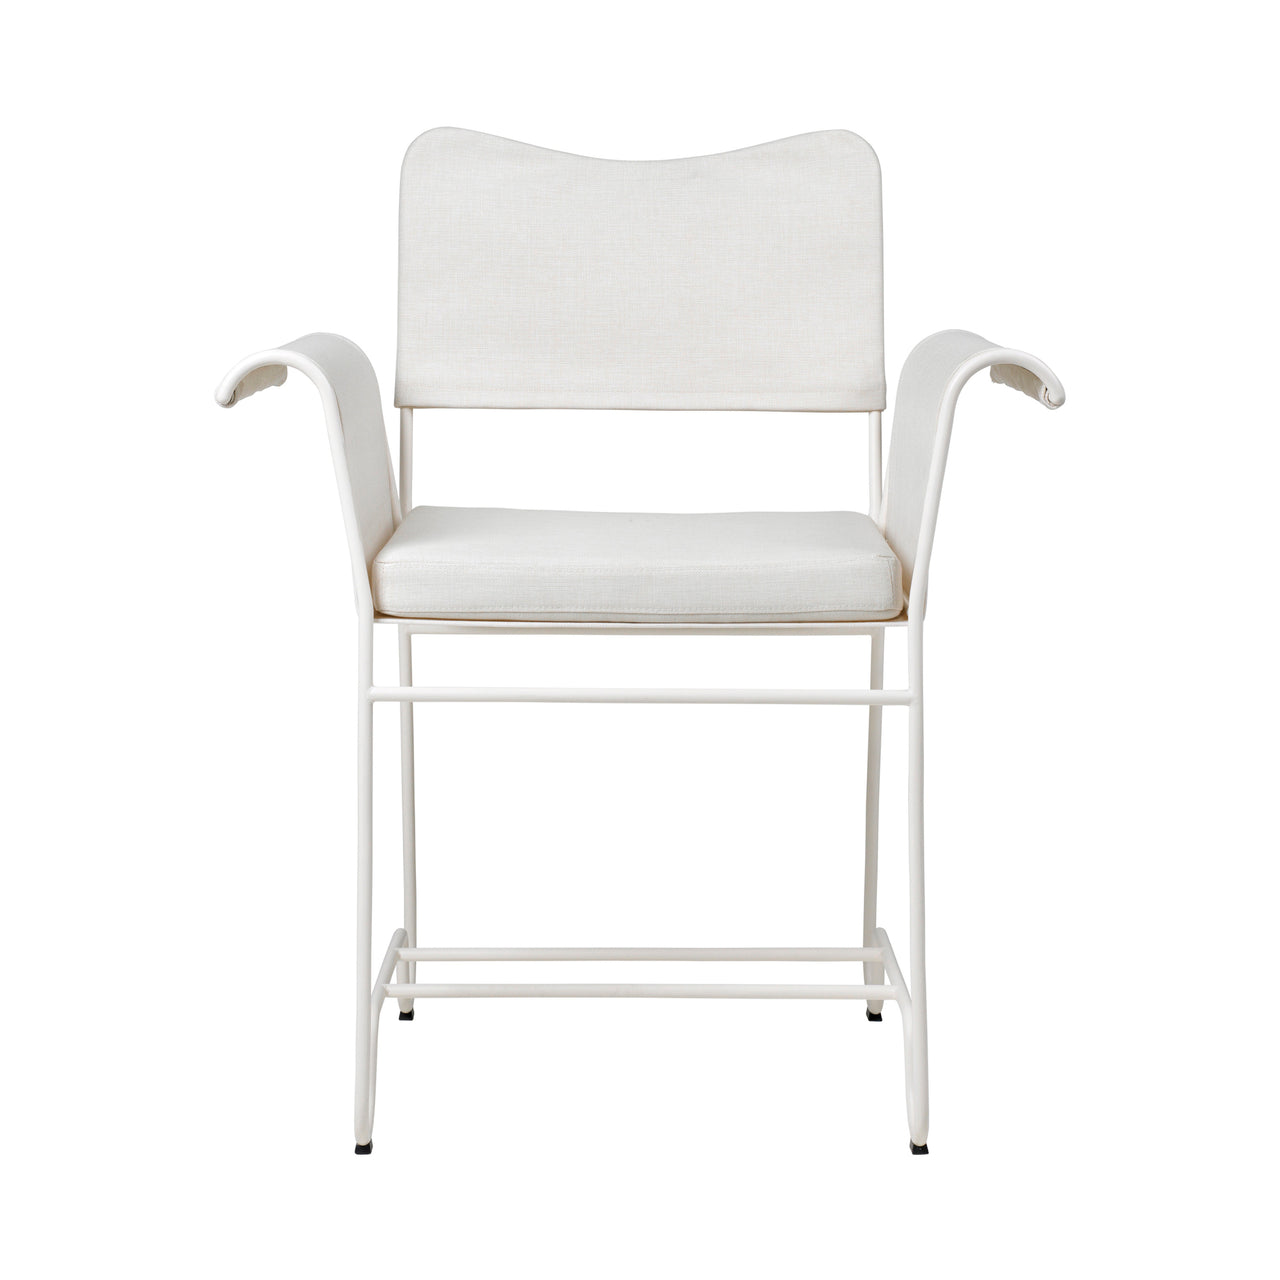 Tropique Dining Chair: Outdoor + Without Fringes + White Semi Matt + Leslie 06